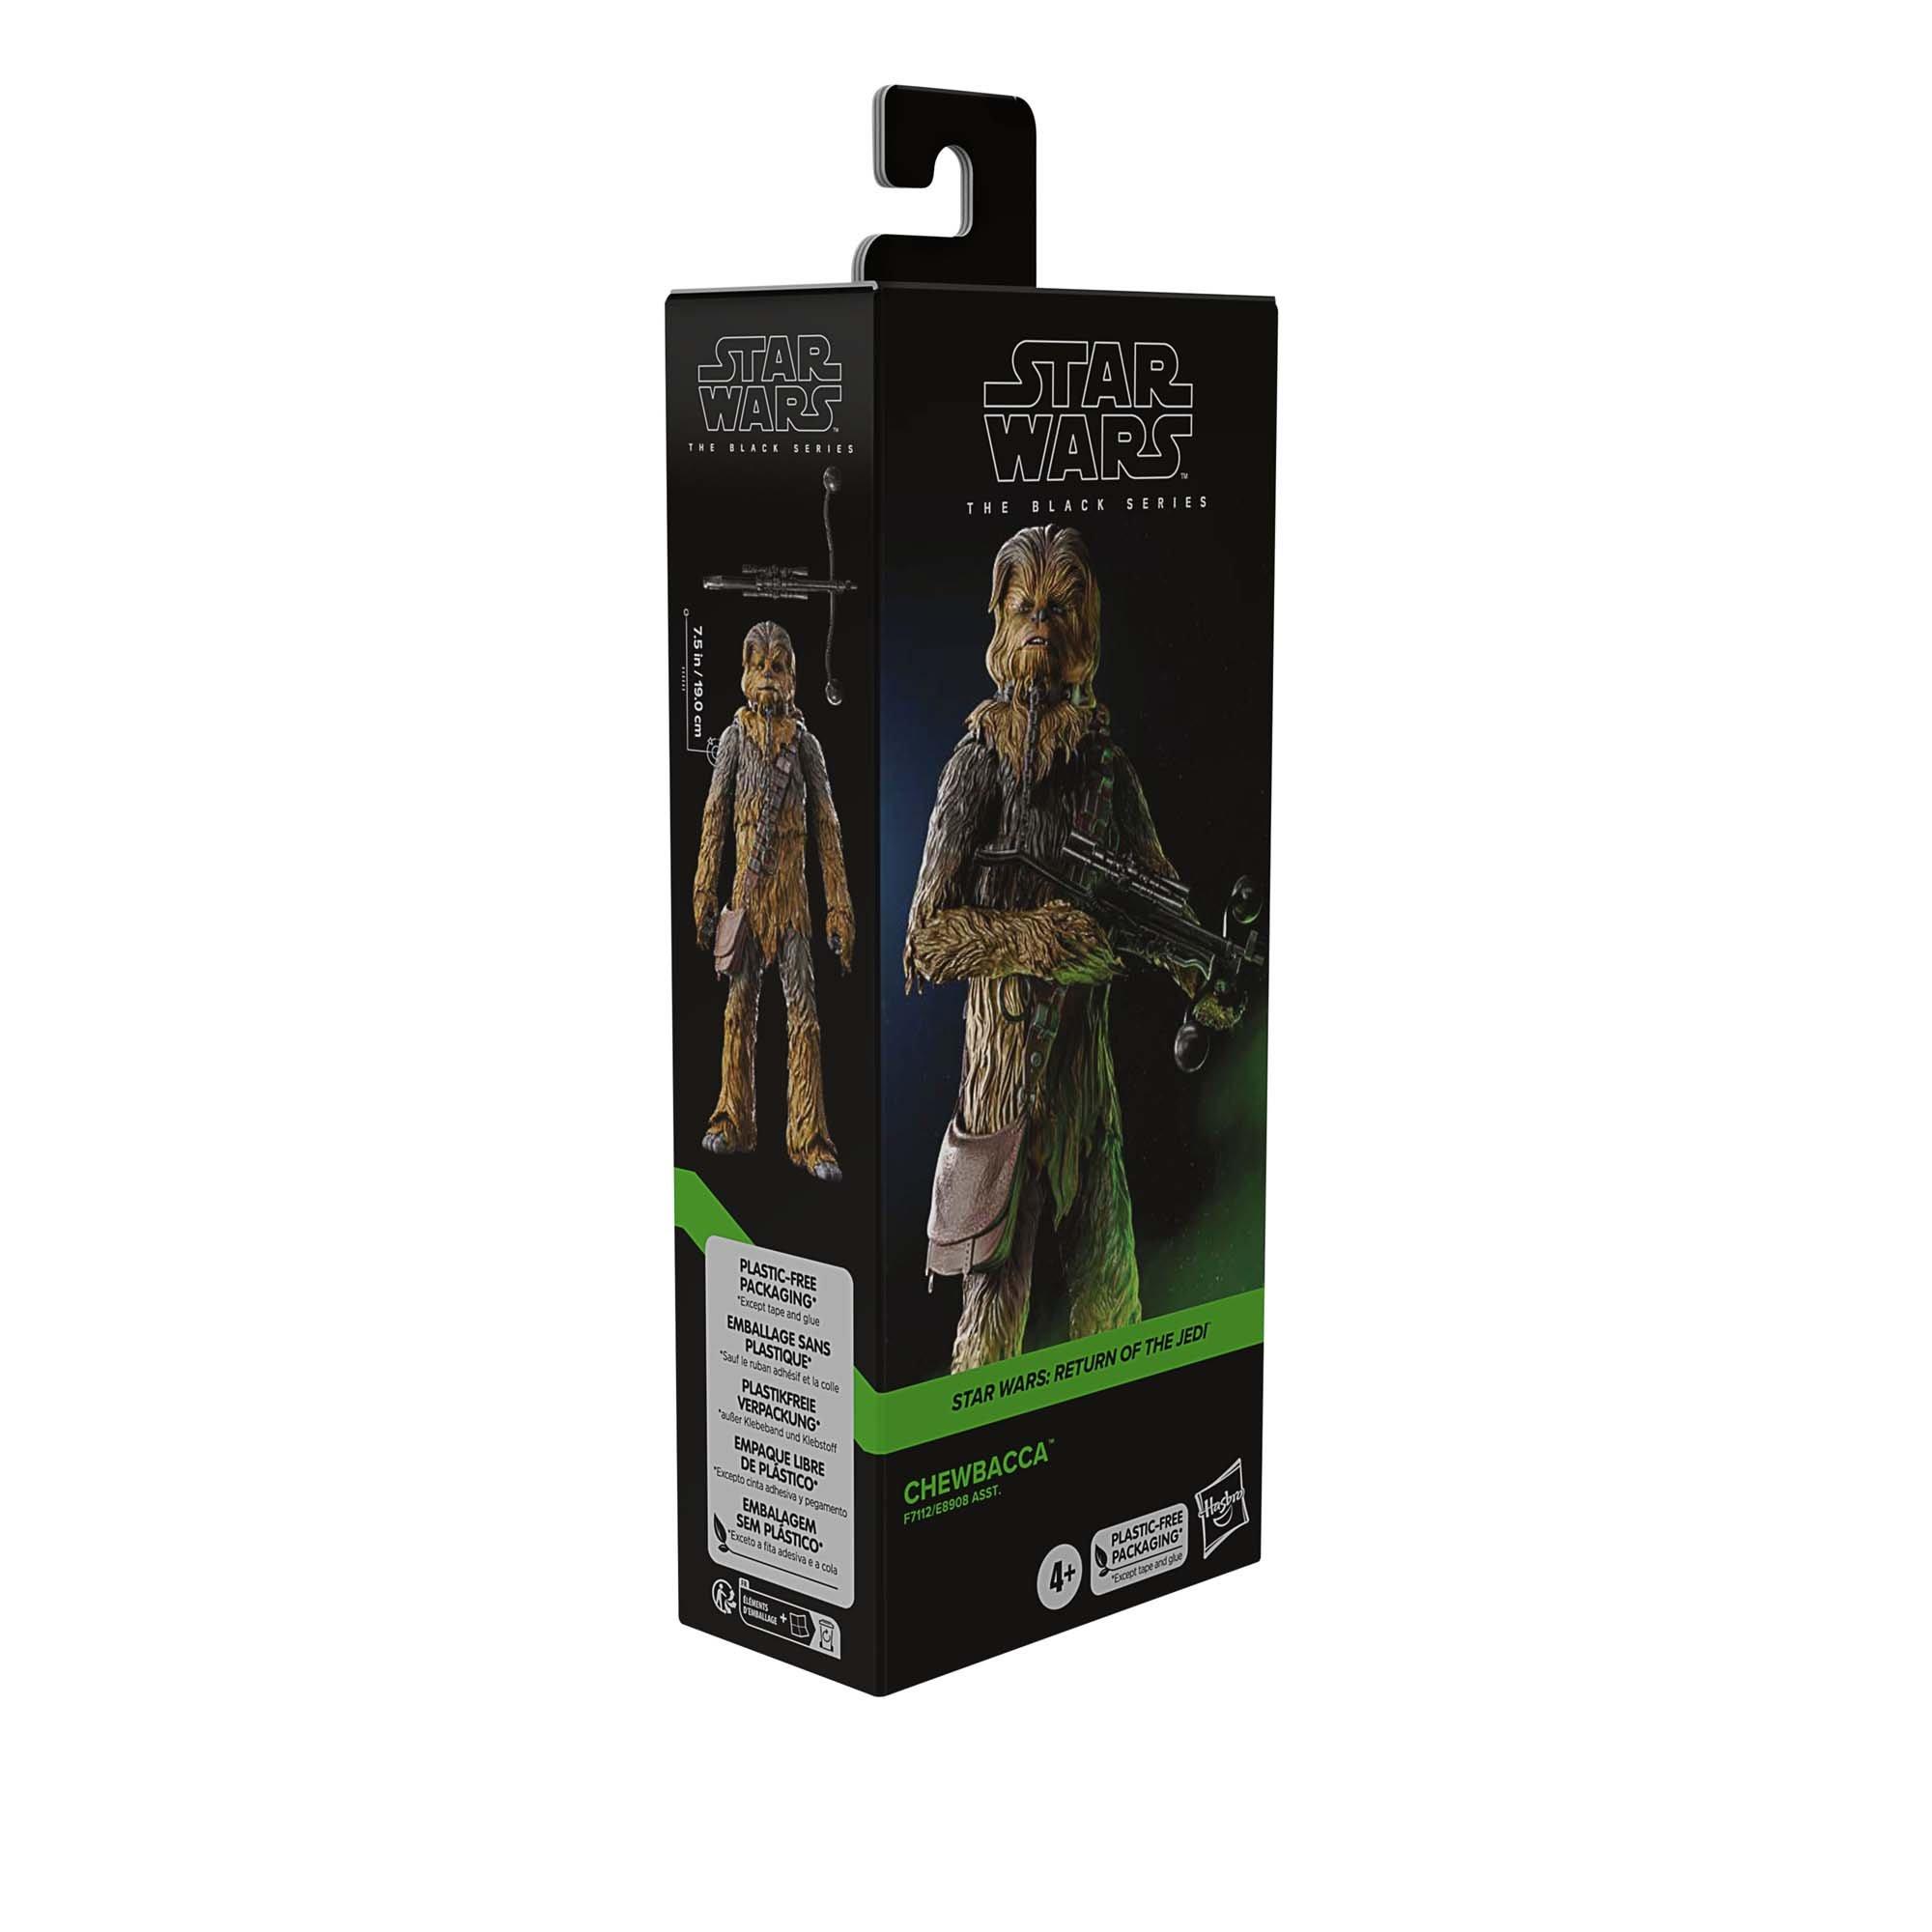 Hasbro Star Wars: The Black Series Star Wars: Return of the Jedi Chewbacca 6-in Action Figure